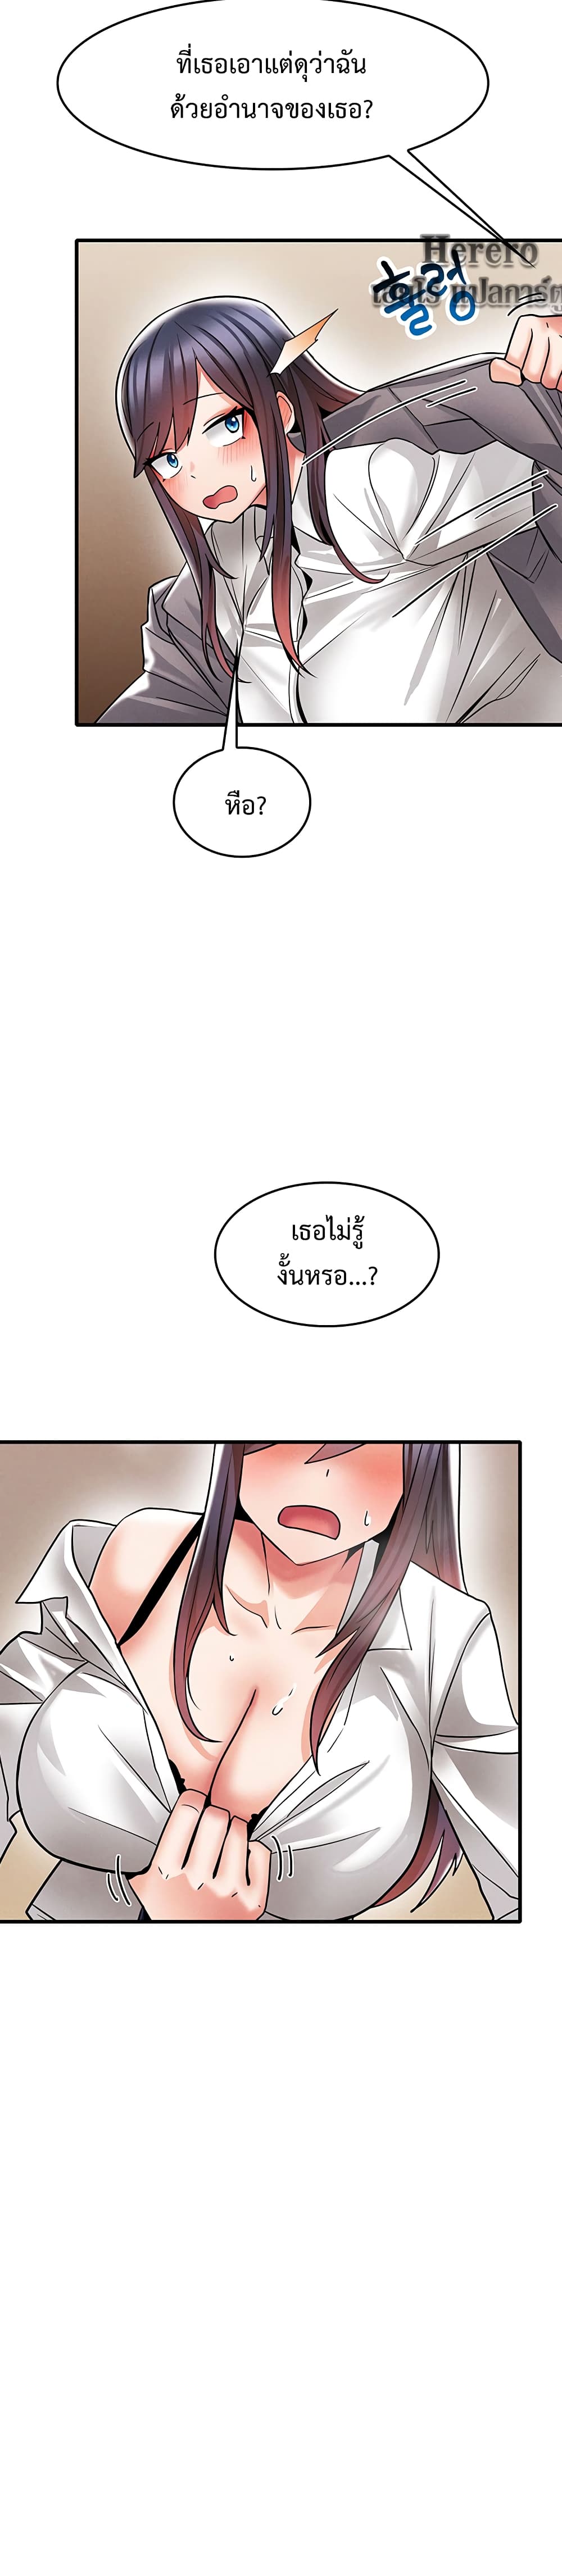 Relationship Reverse Button: Let’s Make Her Submissive 5 ภาพที่ 16